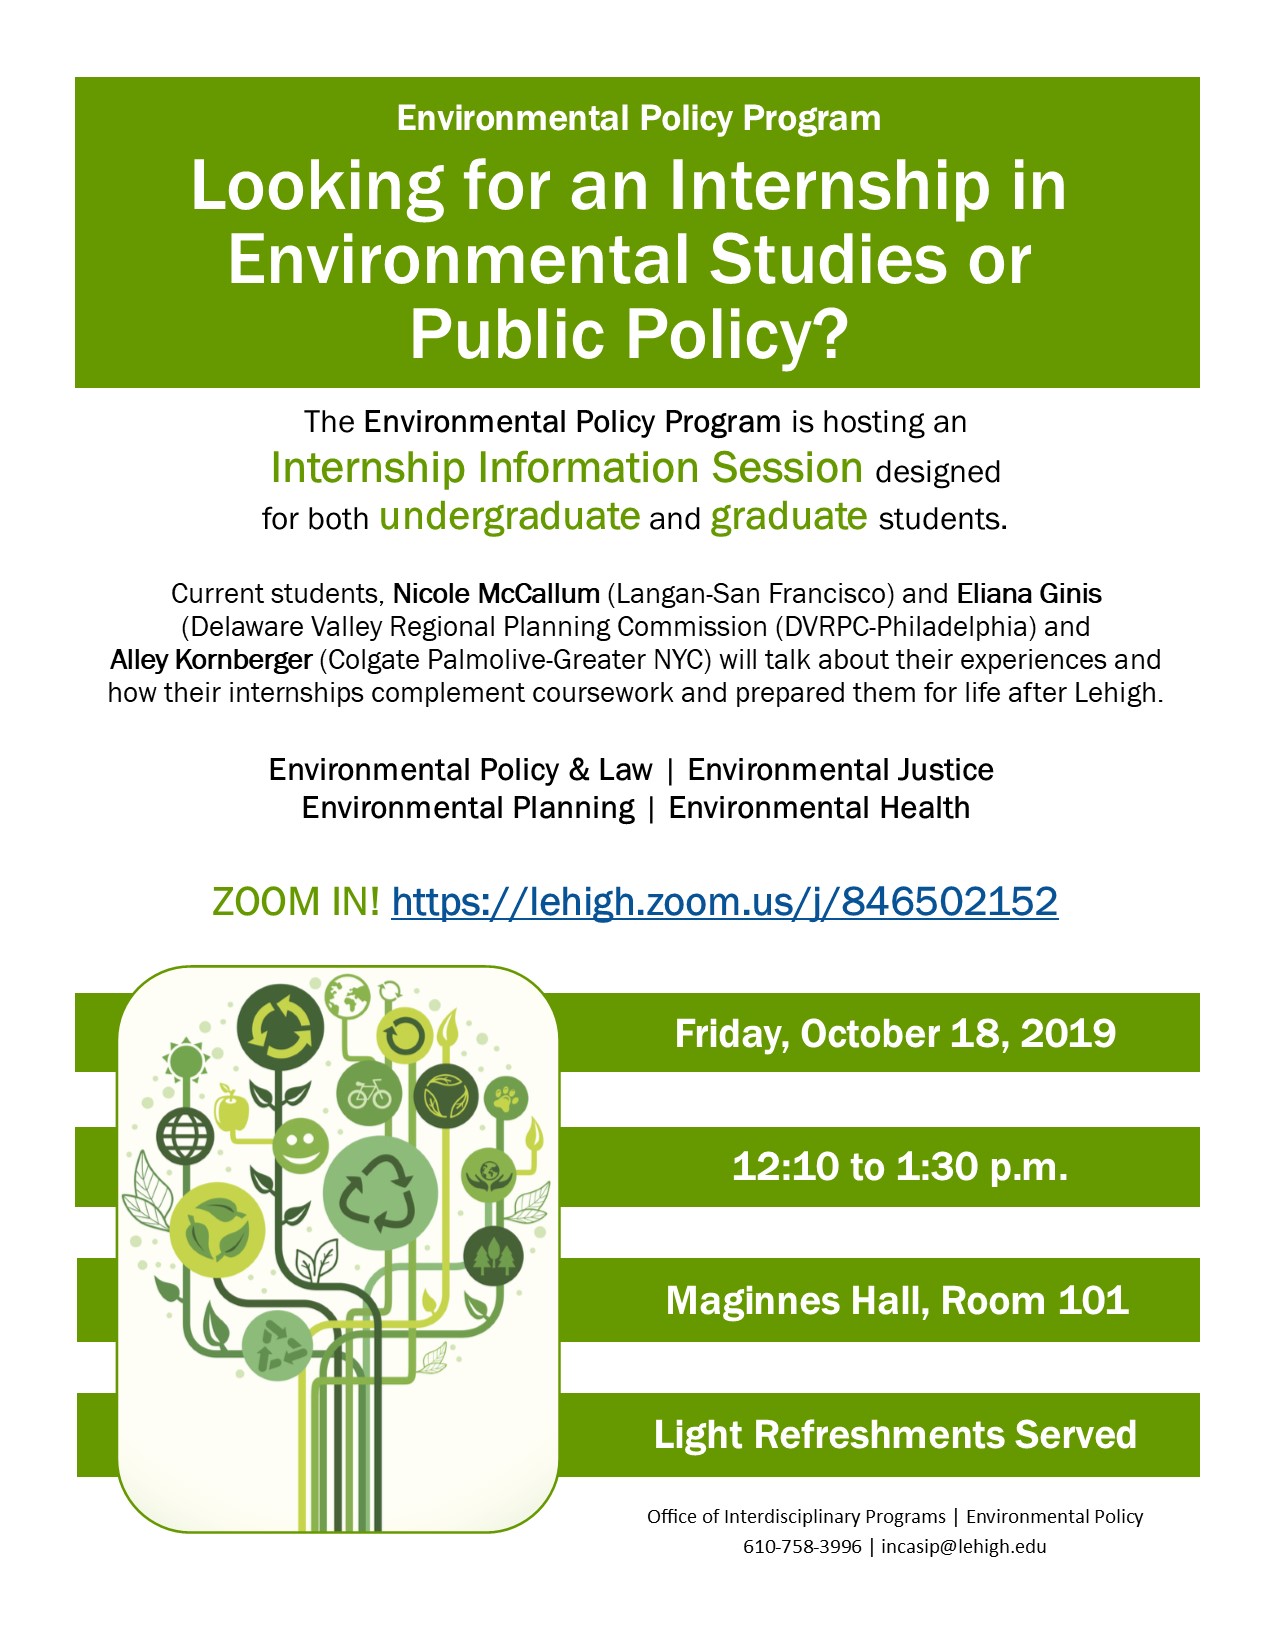 Looking for an Internship in Environmental Studies or Public Policy